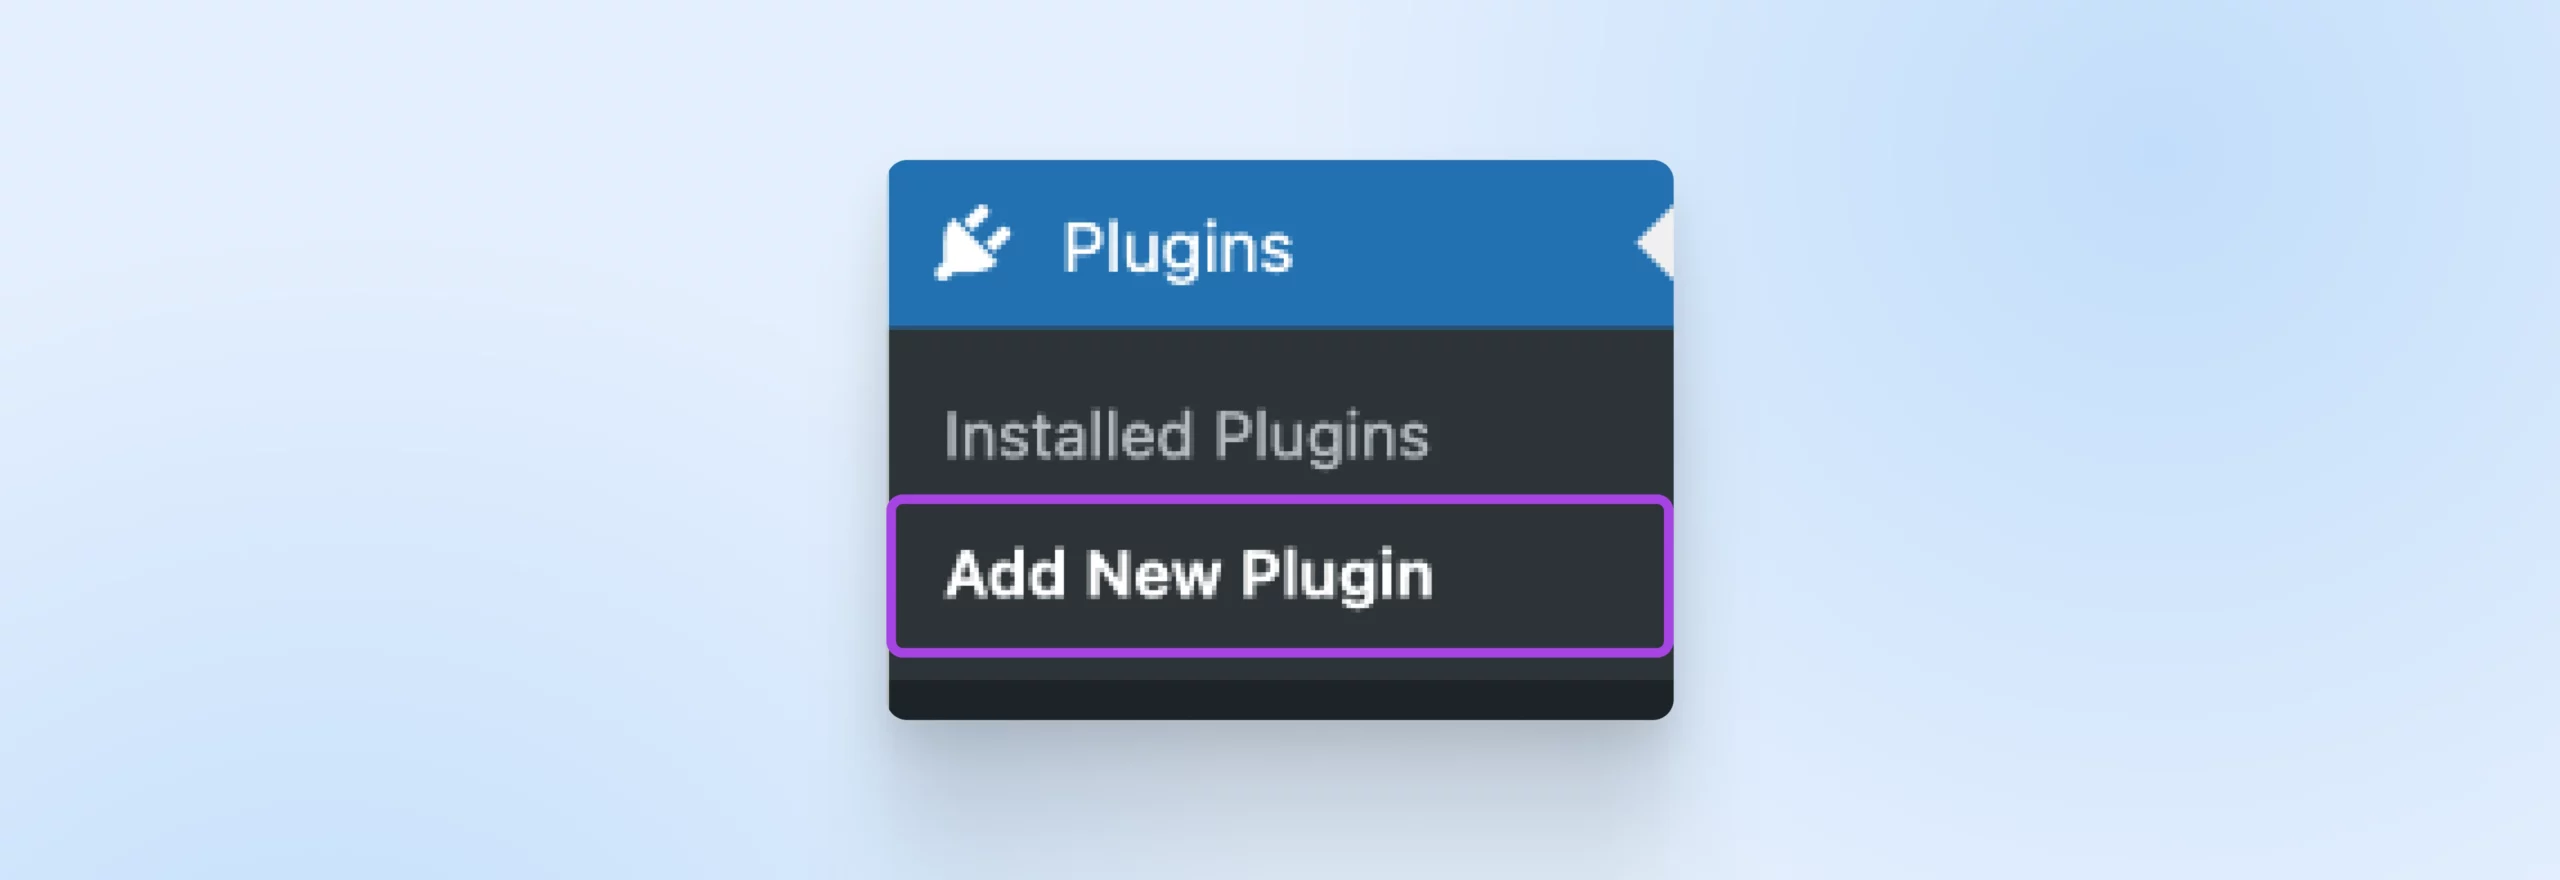 The Plugins menu appears. The options are 'Installed Plugins' and 'Add New Plugin,' which has a purple box around it